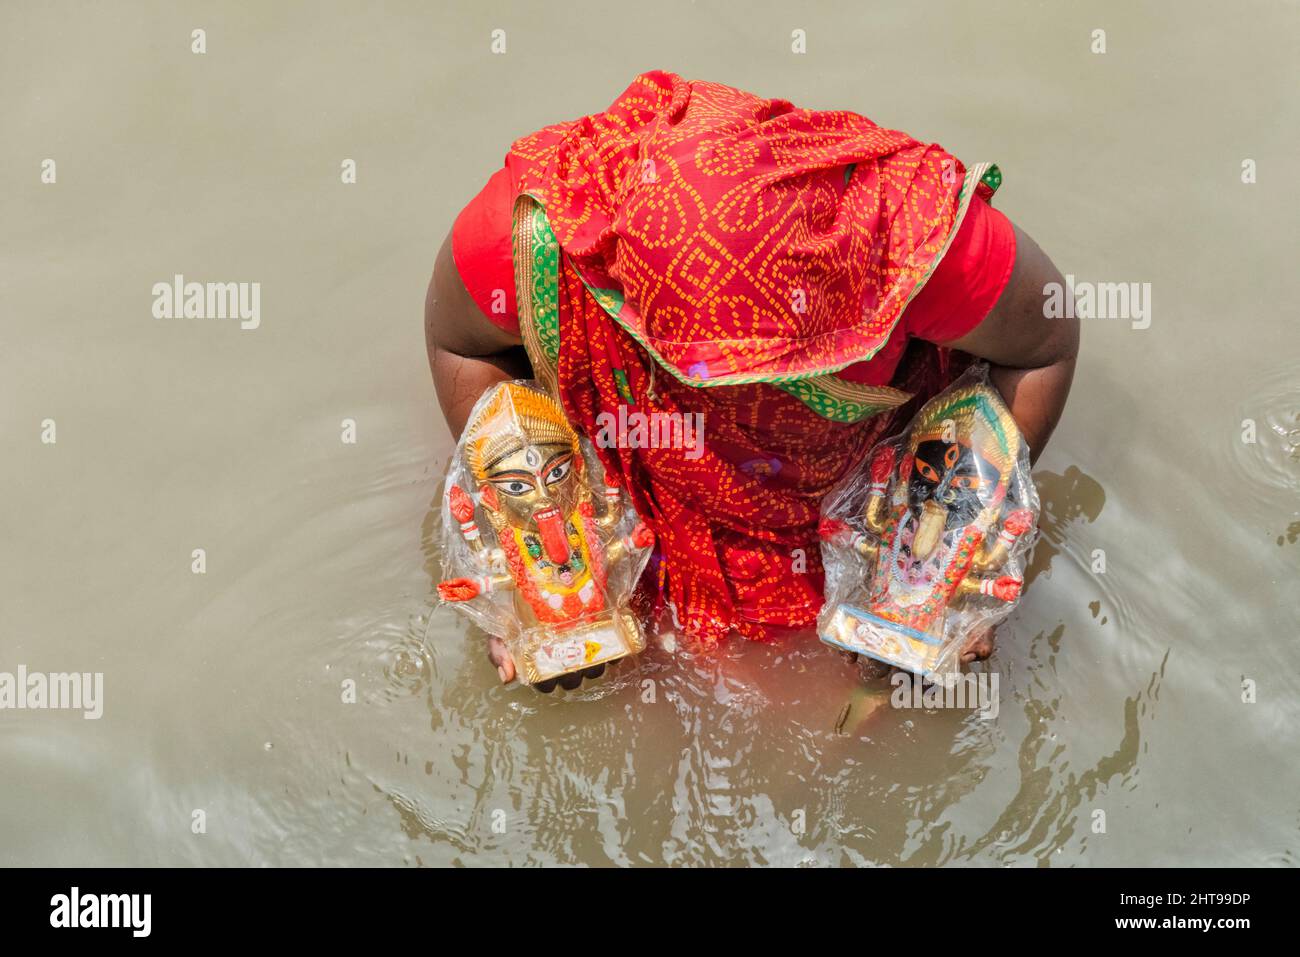 Woman taking a holy dip in Ganges River, Kolkata, West Bengal, India Stock Photo